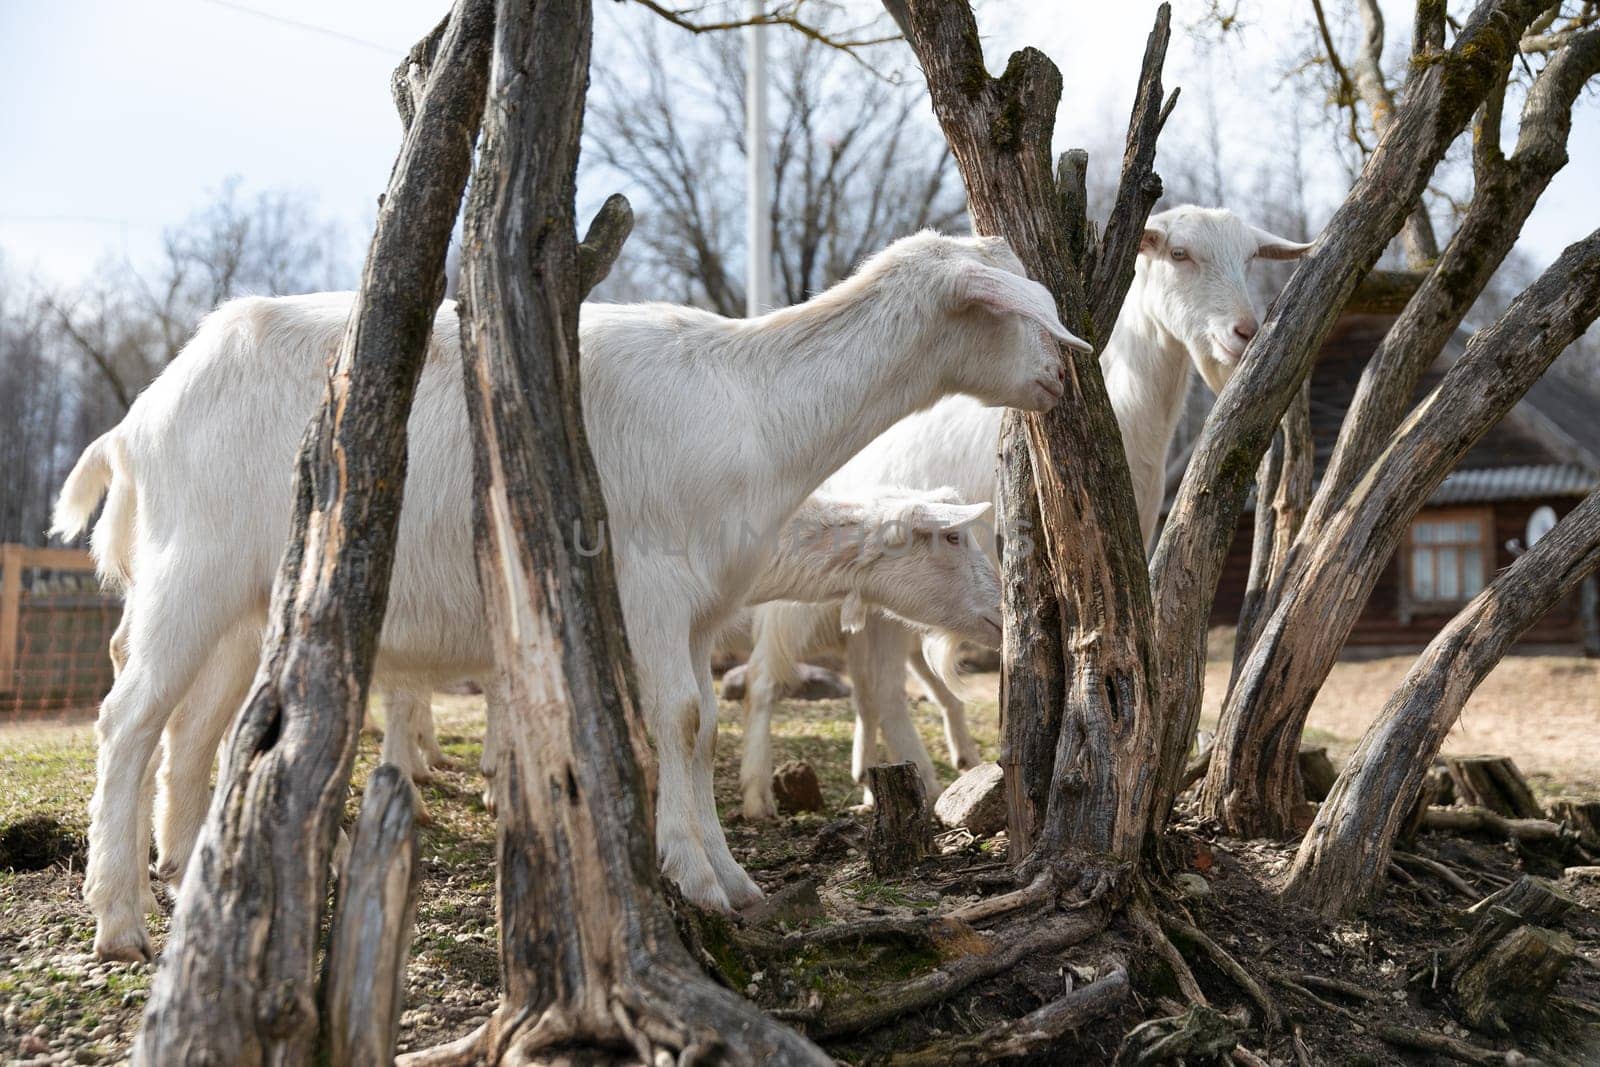 A cluster of white goats stands side by side in a grassy field. These animals are lined up next to each other, looking curiously at their surroundings and occasionally grazing on the lush green grass beneath their hooves.